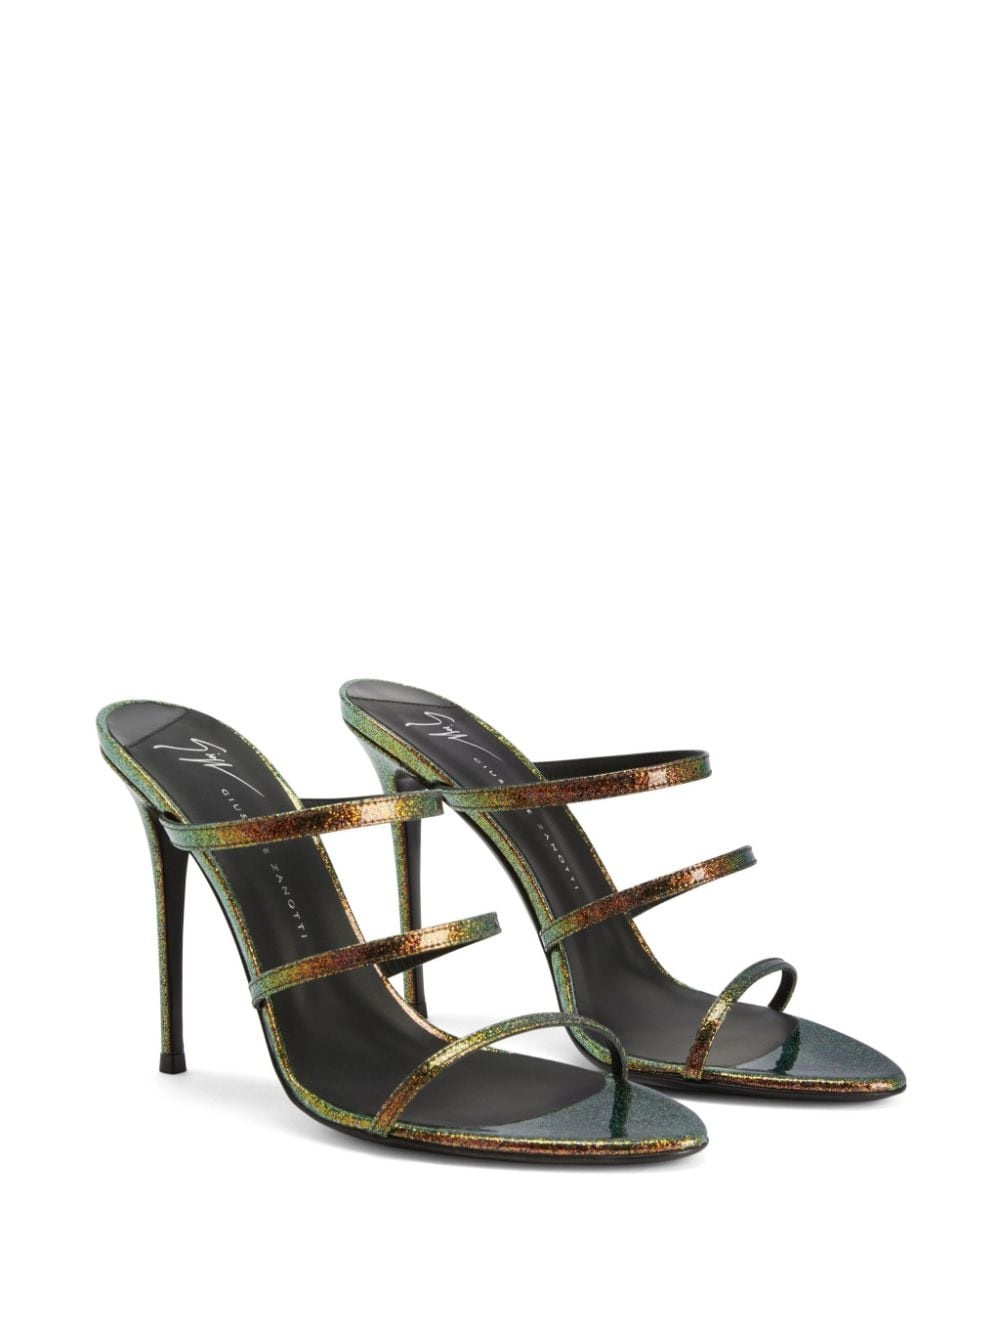 Alimha 105mm leather sandals - 2